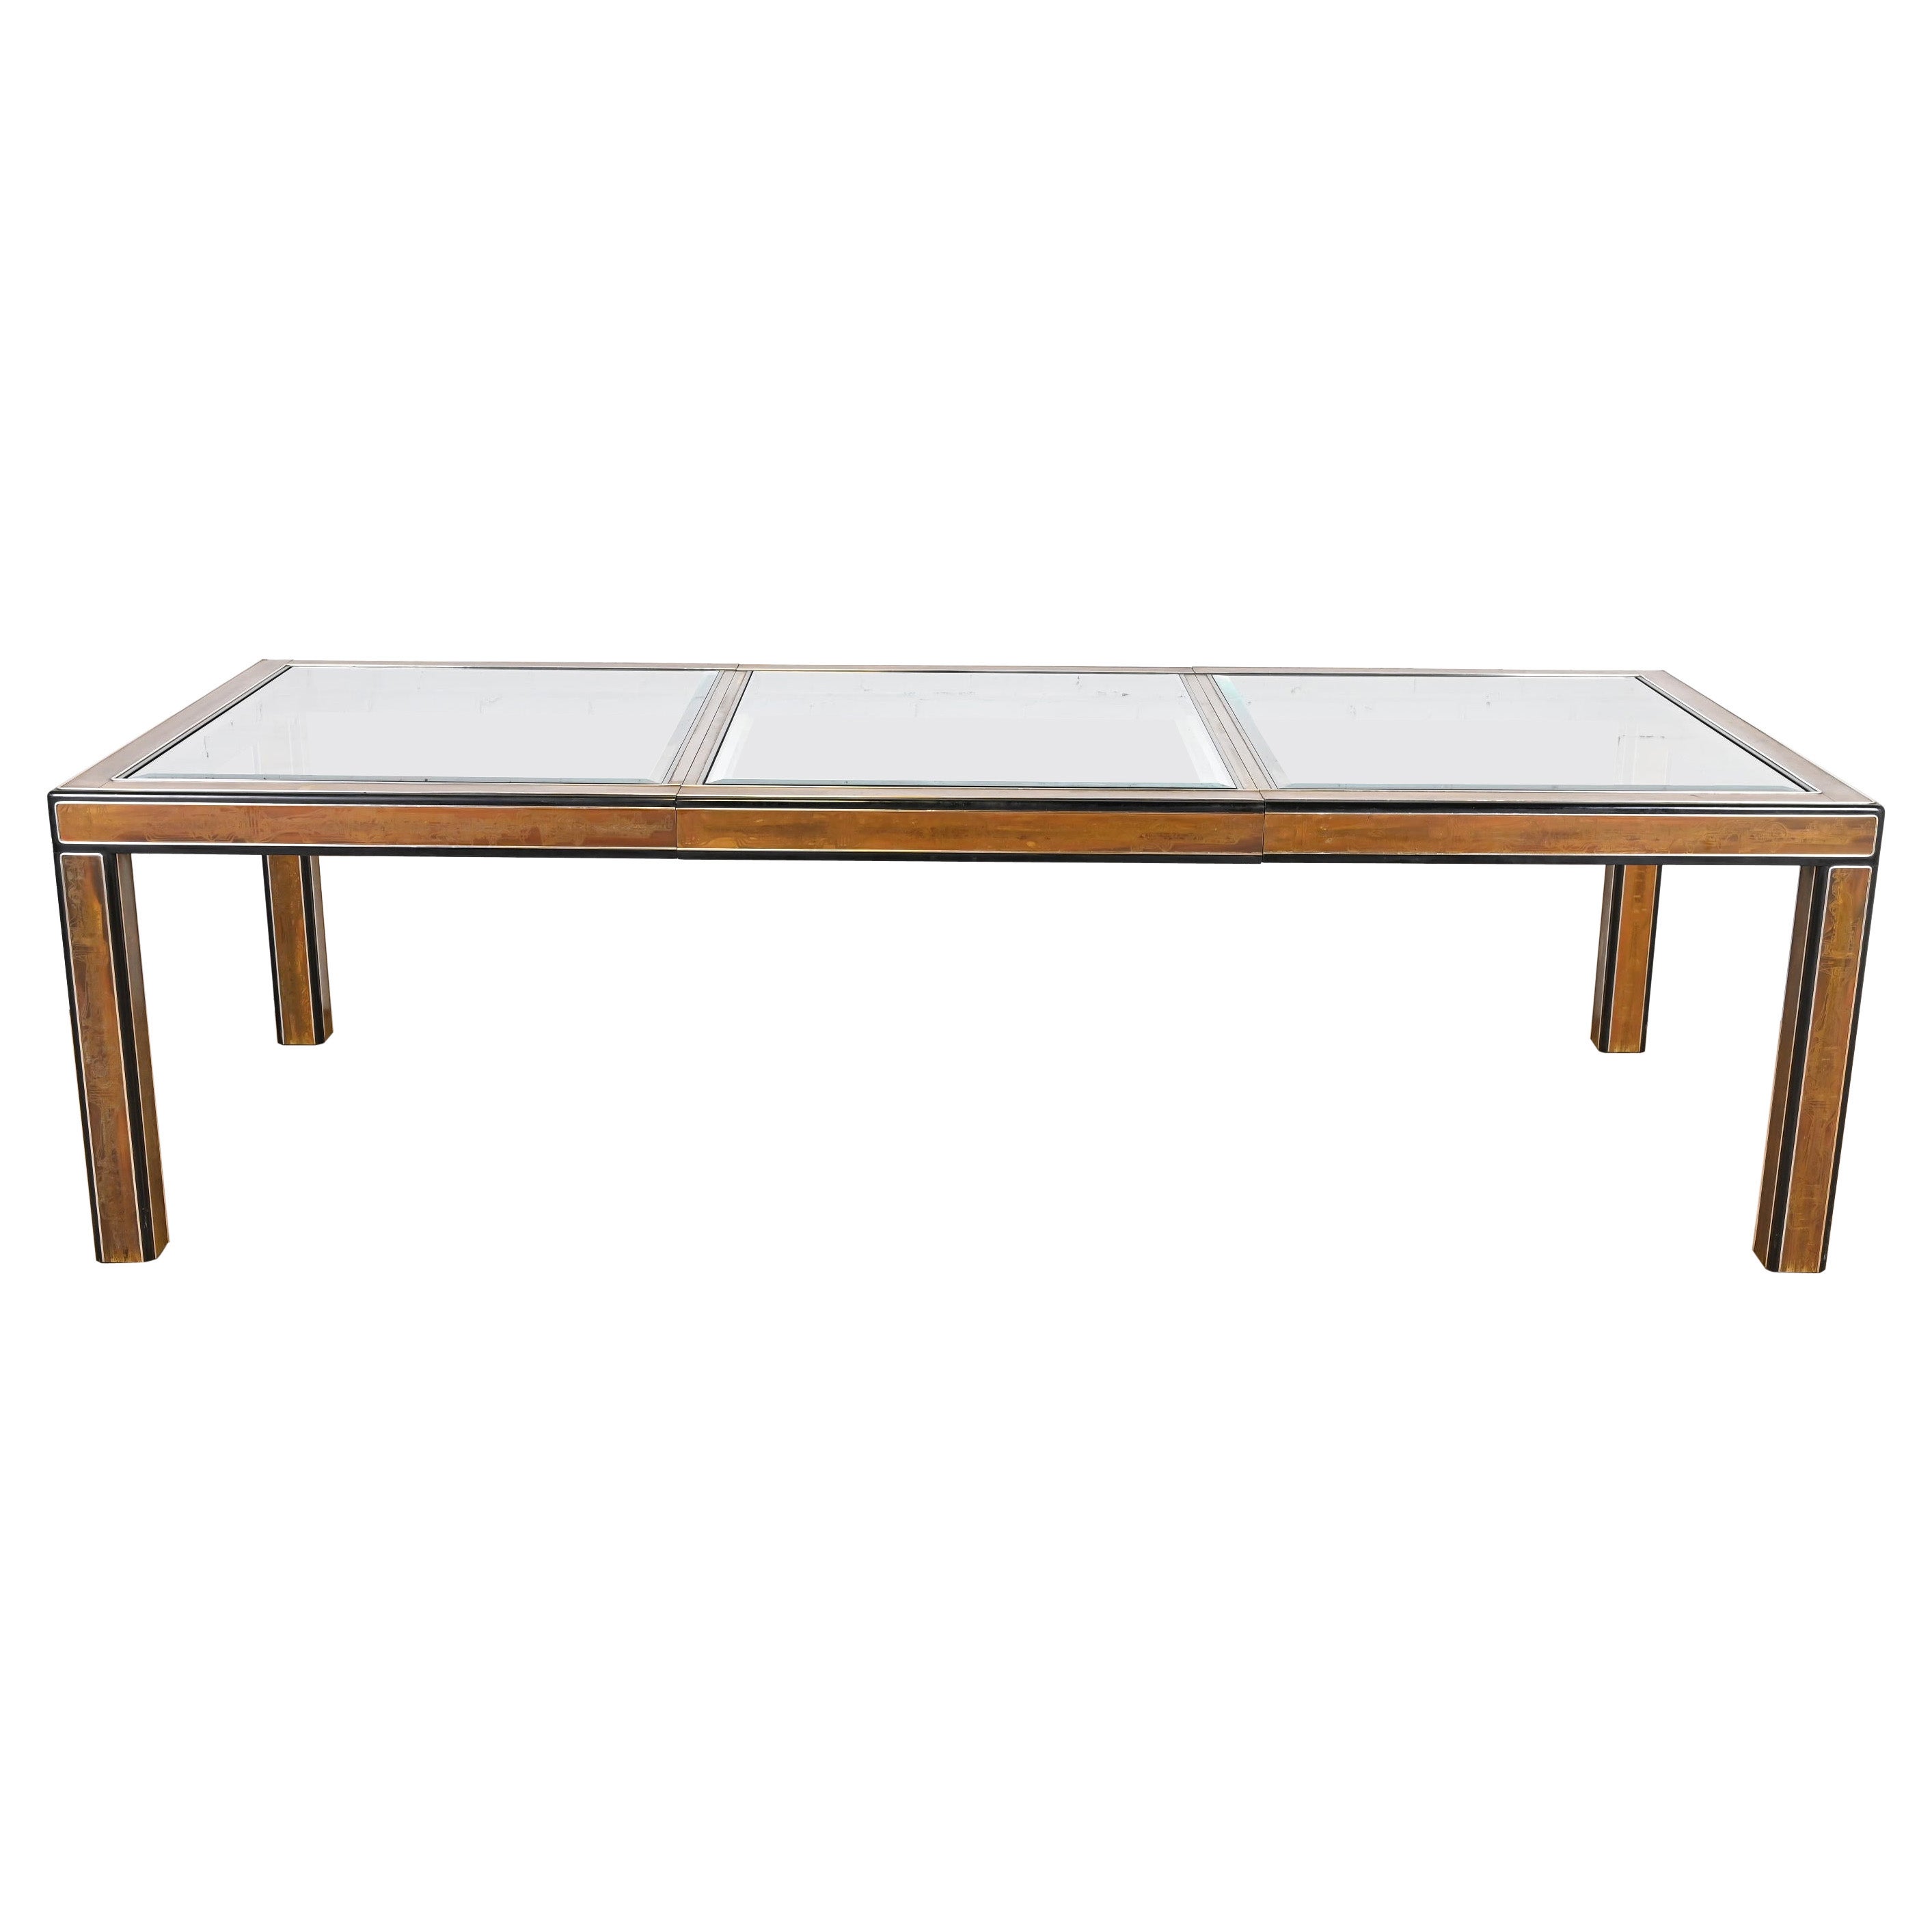 Bernhard Rohne for Mastercraft Acid Etched Brass Extension Dining Table, 1970s